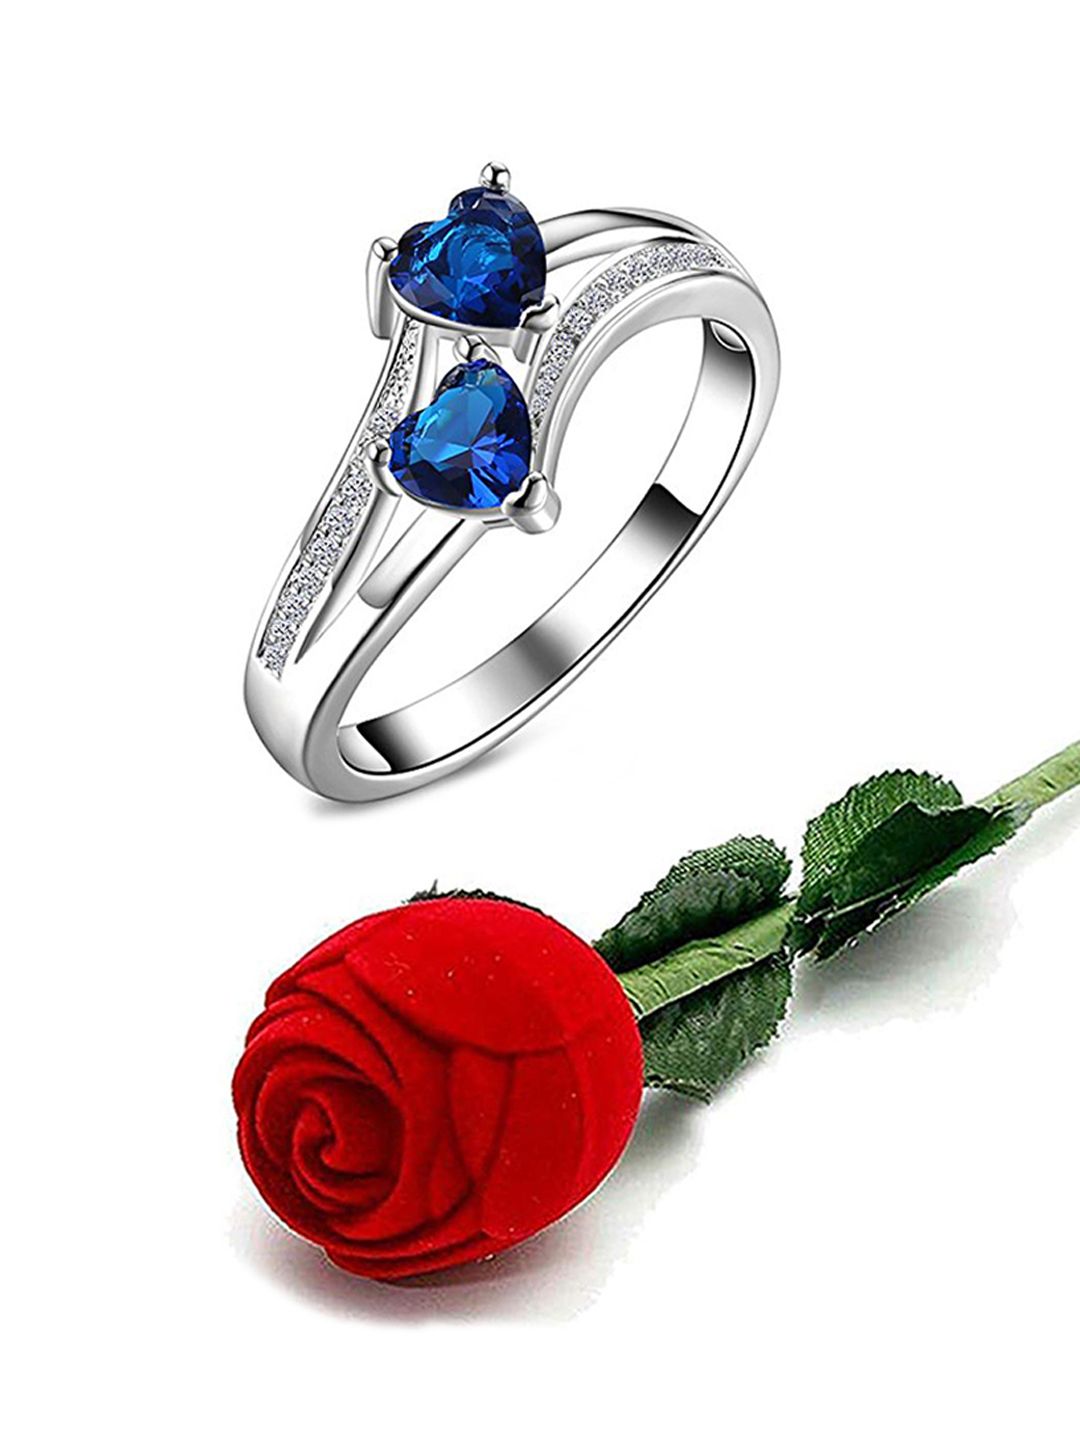 Yellow Chimes 925 Silver-Plated Blue Crystal Dual-Heart Ring in Red Velvet Rose Ring Box Price in India